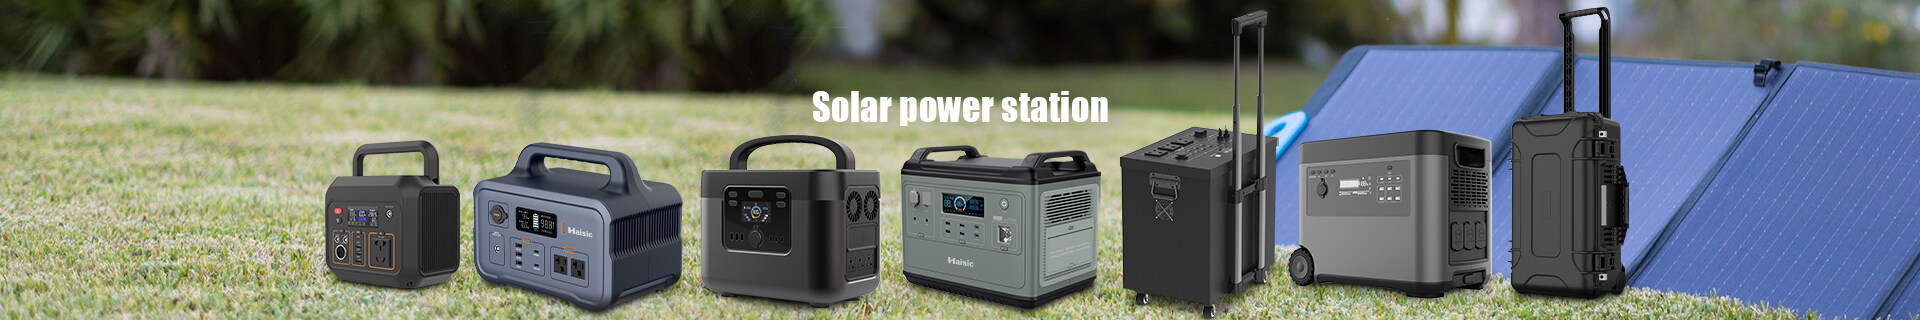 portable power station factory, portable power station china